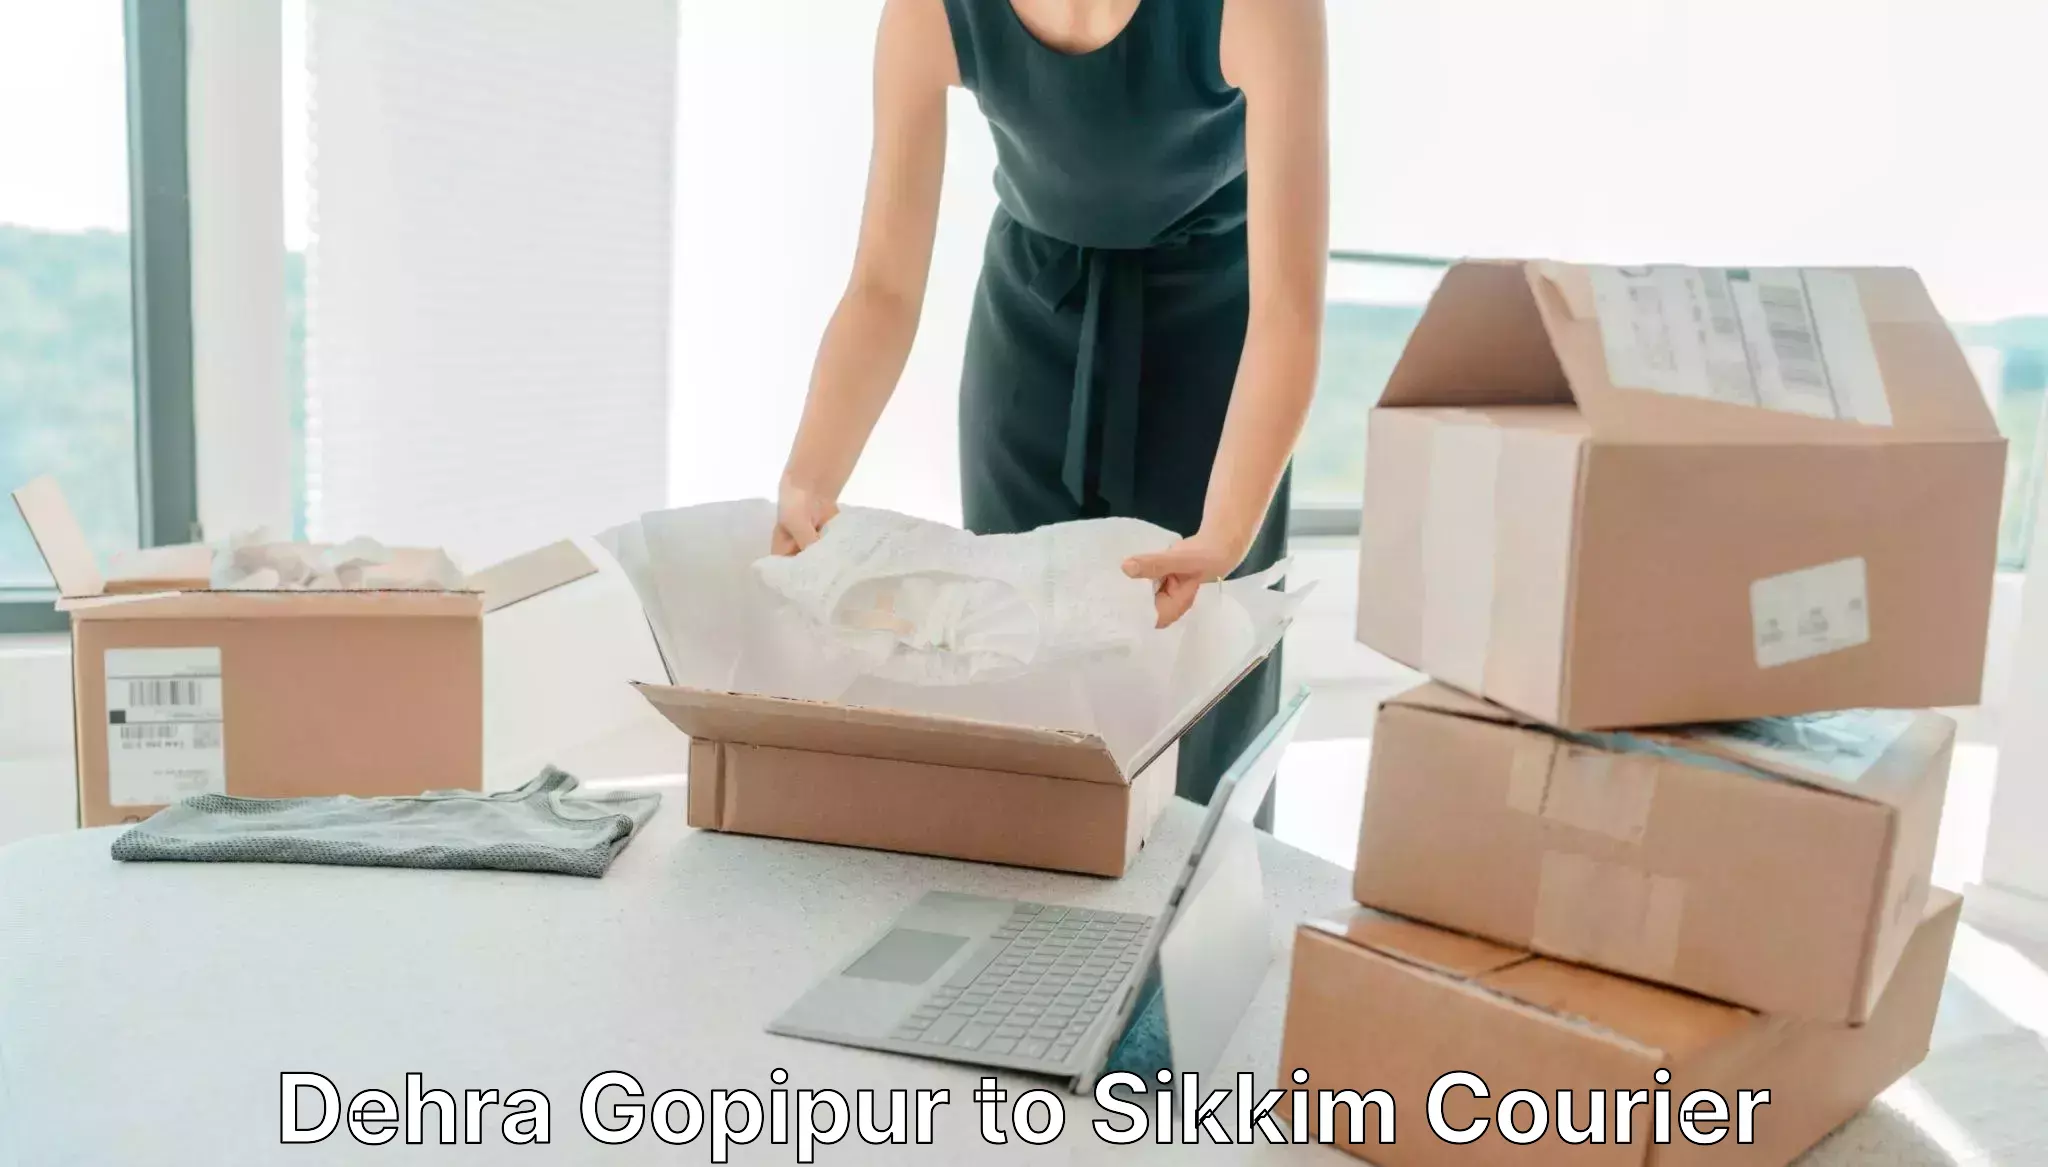 Comprehensive shipping network Dehra Gopipur to Sikkim